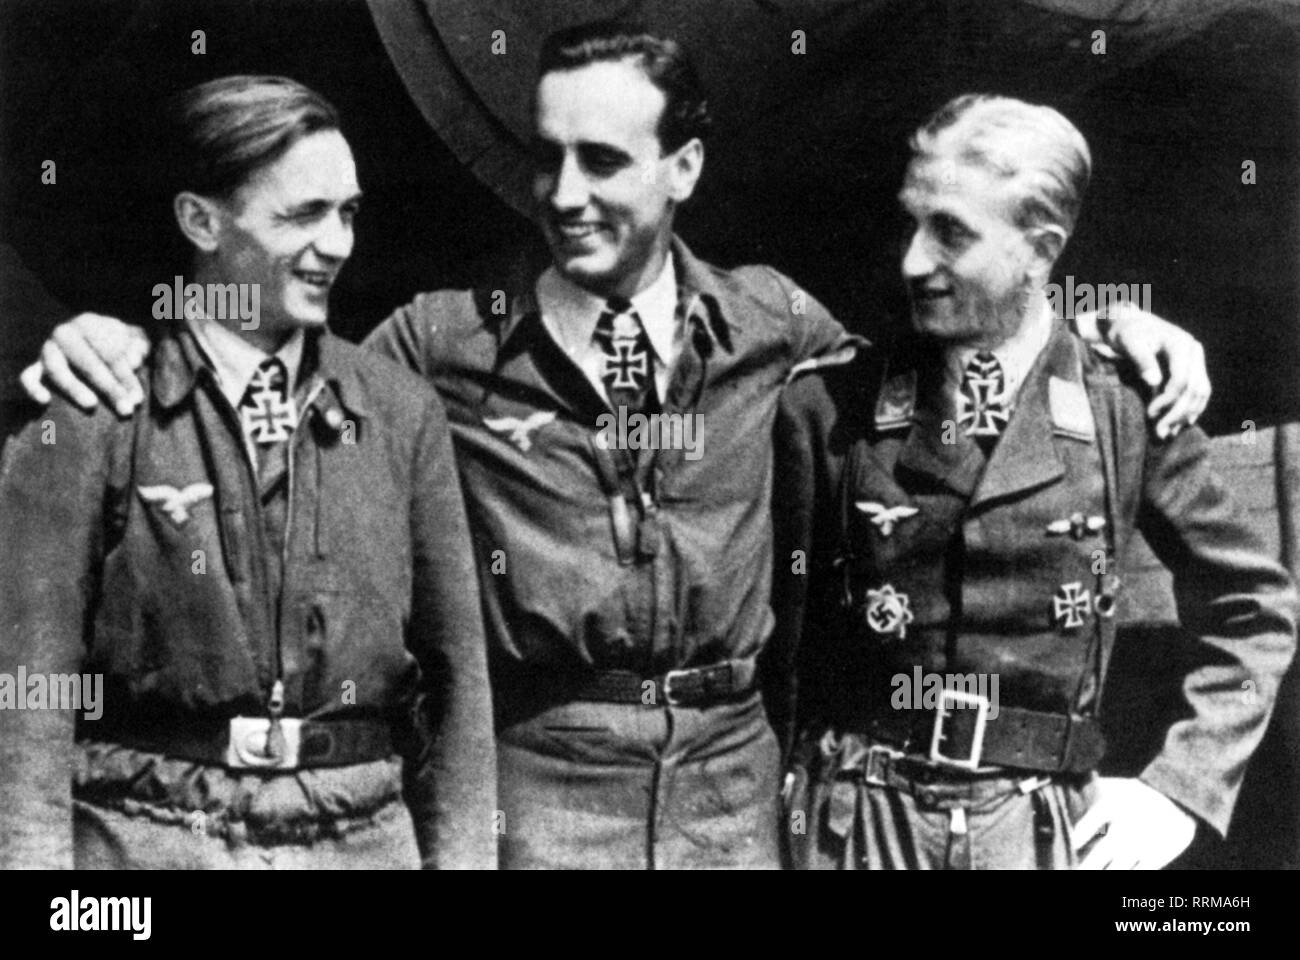 Schnaufer, Heinz-Wolfgang, 16.2.1922 - 15.7.1950, German air force officer, half length, with his crew, aerial gunner Wilhelm Gaensler, radio operator Friedrich Rumpelhardt, 1944 / 1945, Additional-Rights-Clearance-Info-Not-Available Stock Photo